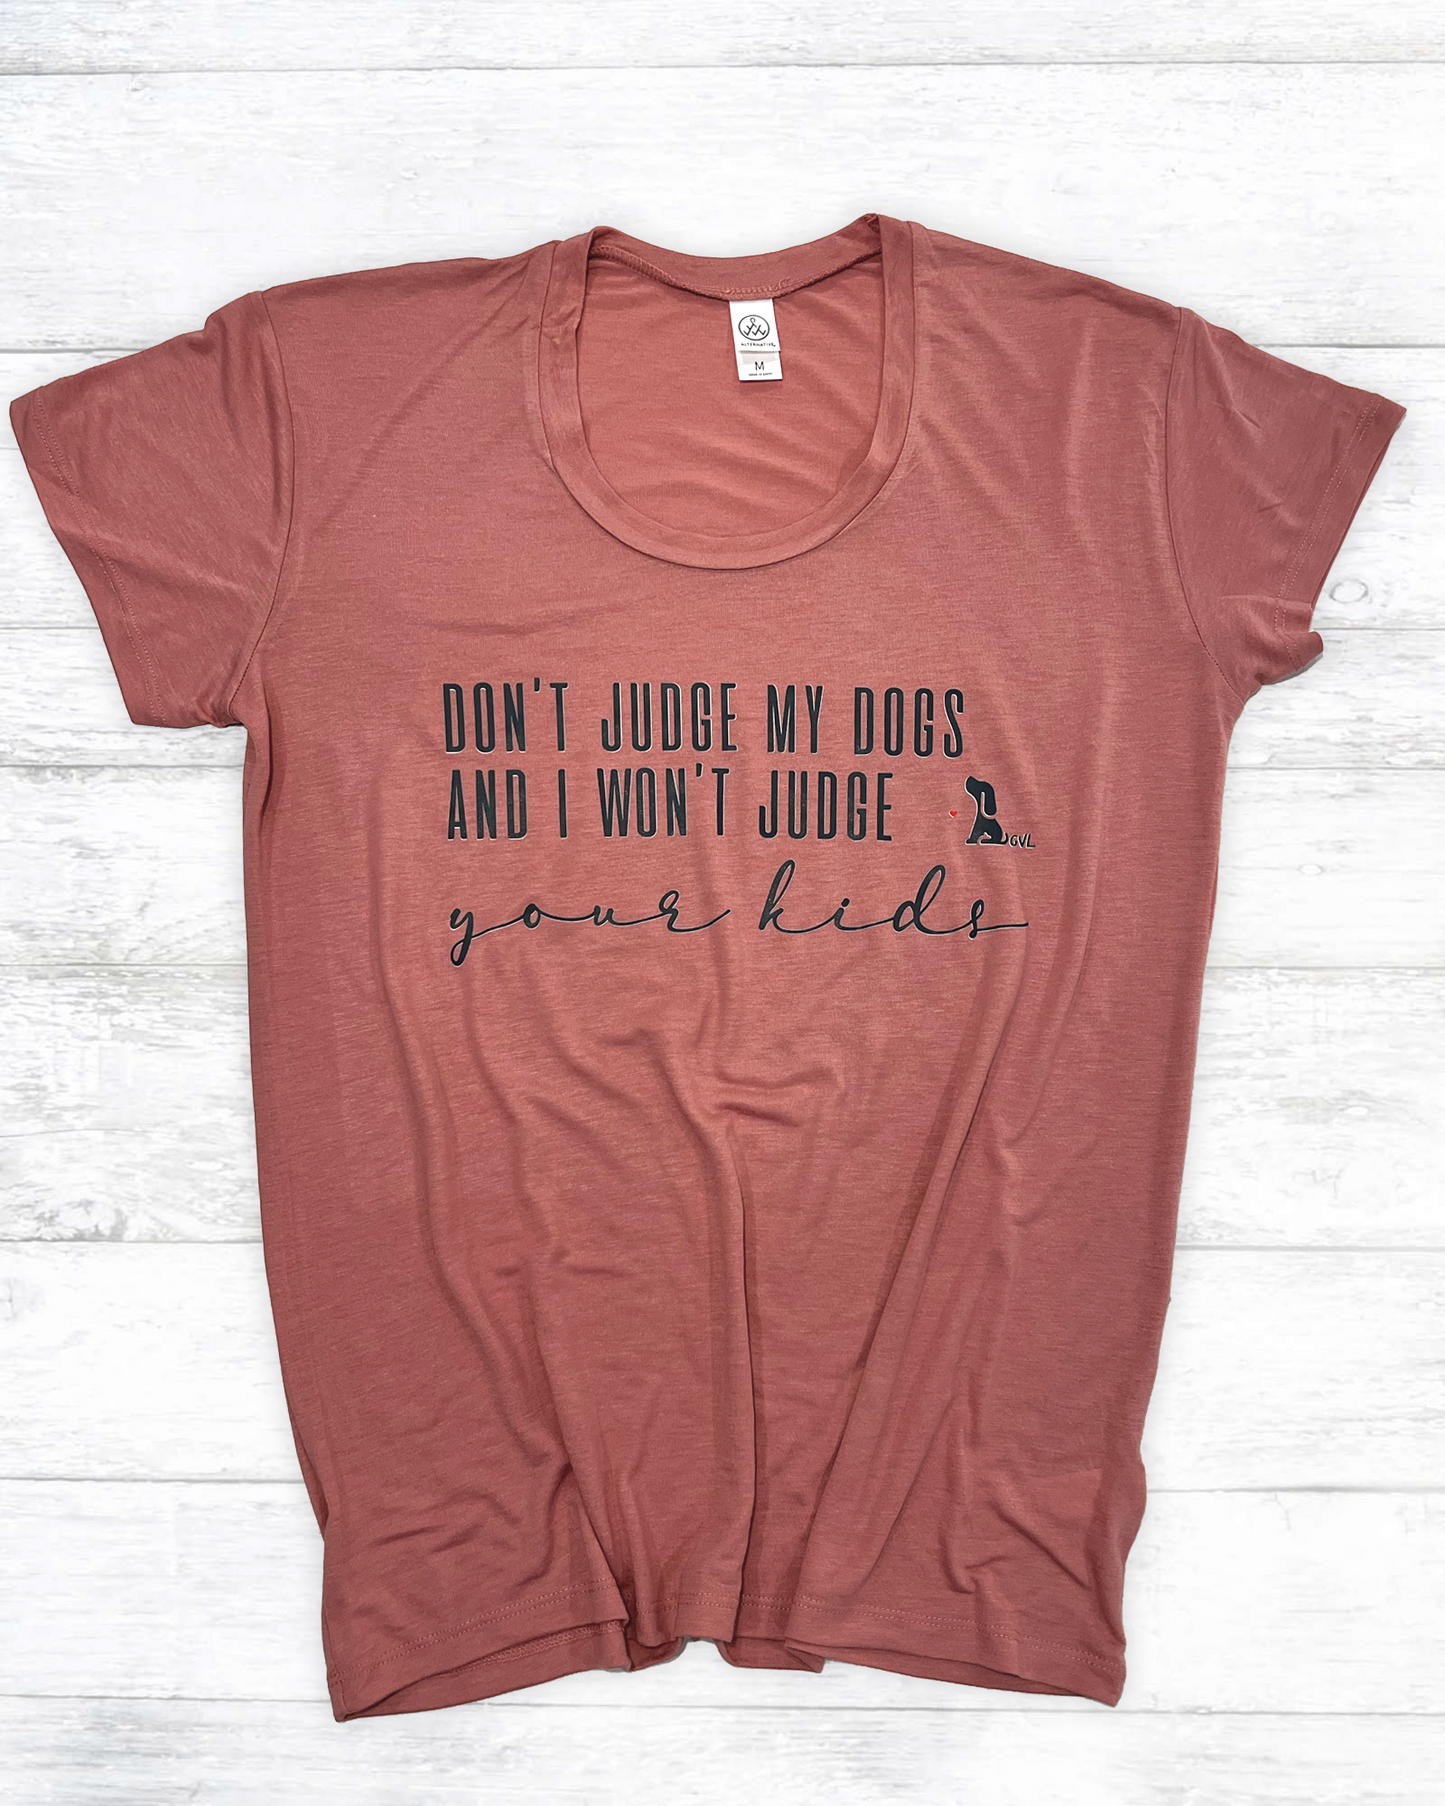 Women's "Don't Judge My Dogs and I Won't Judge Your Kids" Slinky Jersey Tee